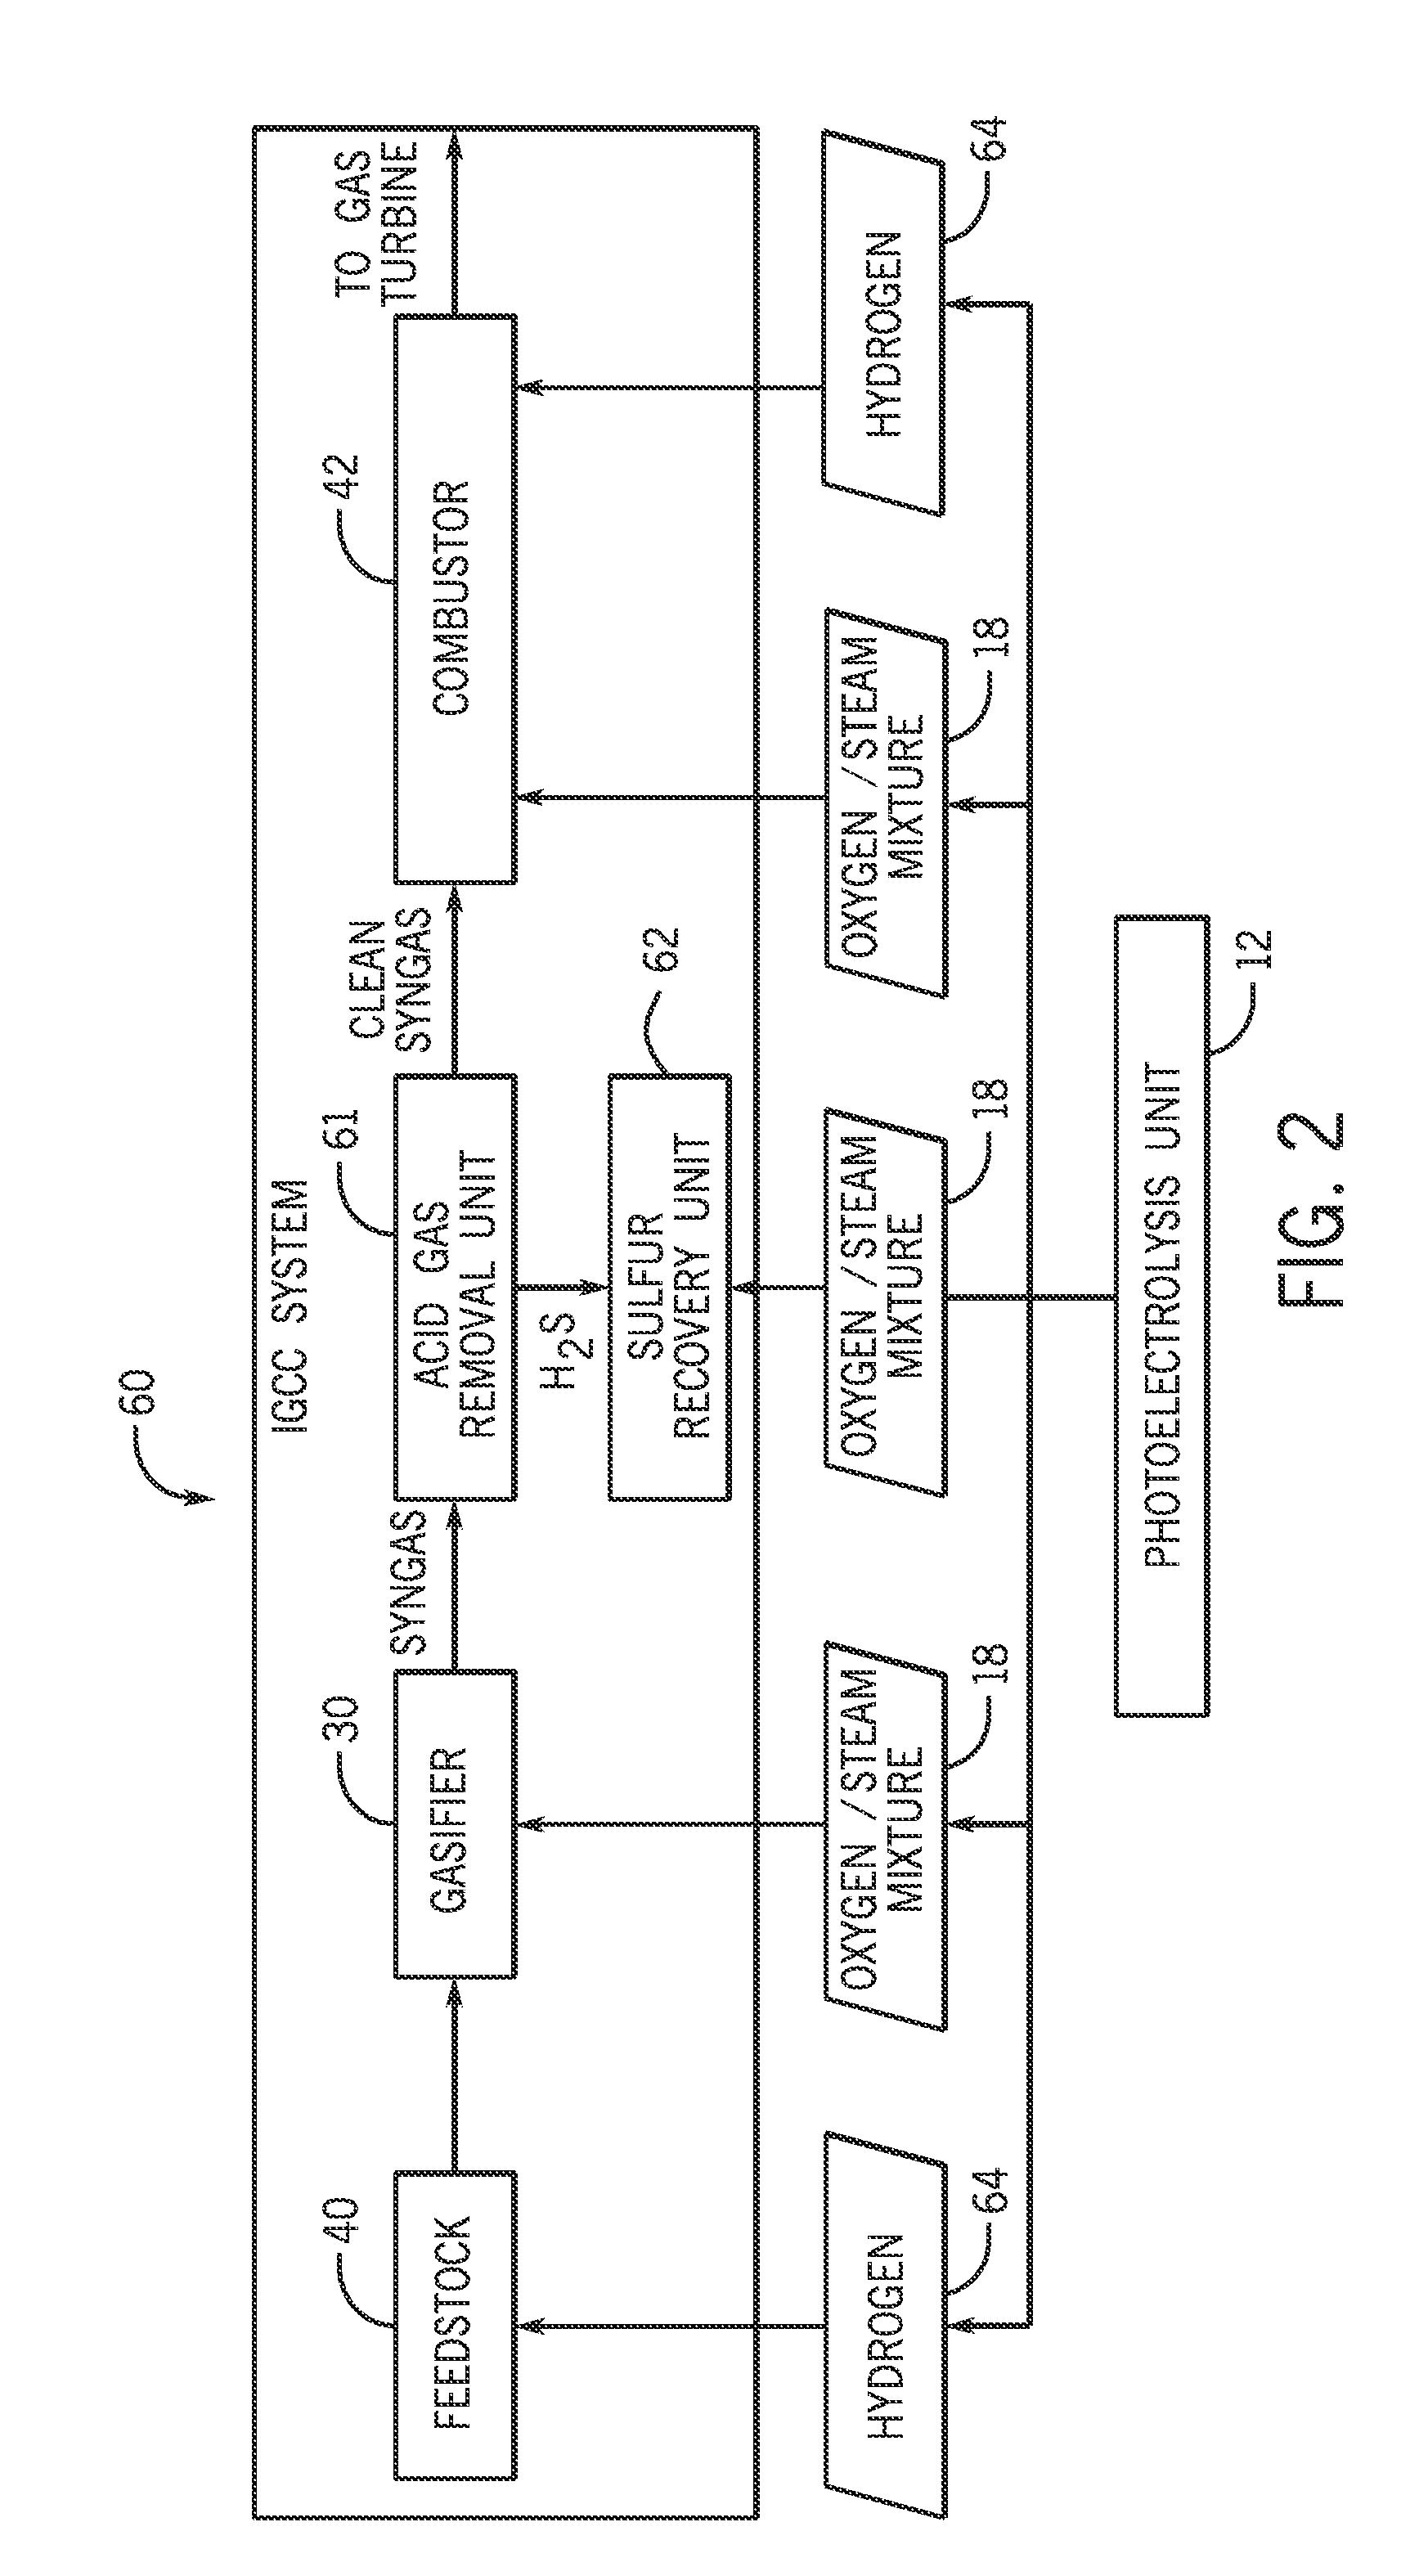 Systems and methods for generating oxygen and hydrogen for plant equipment